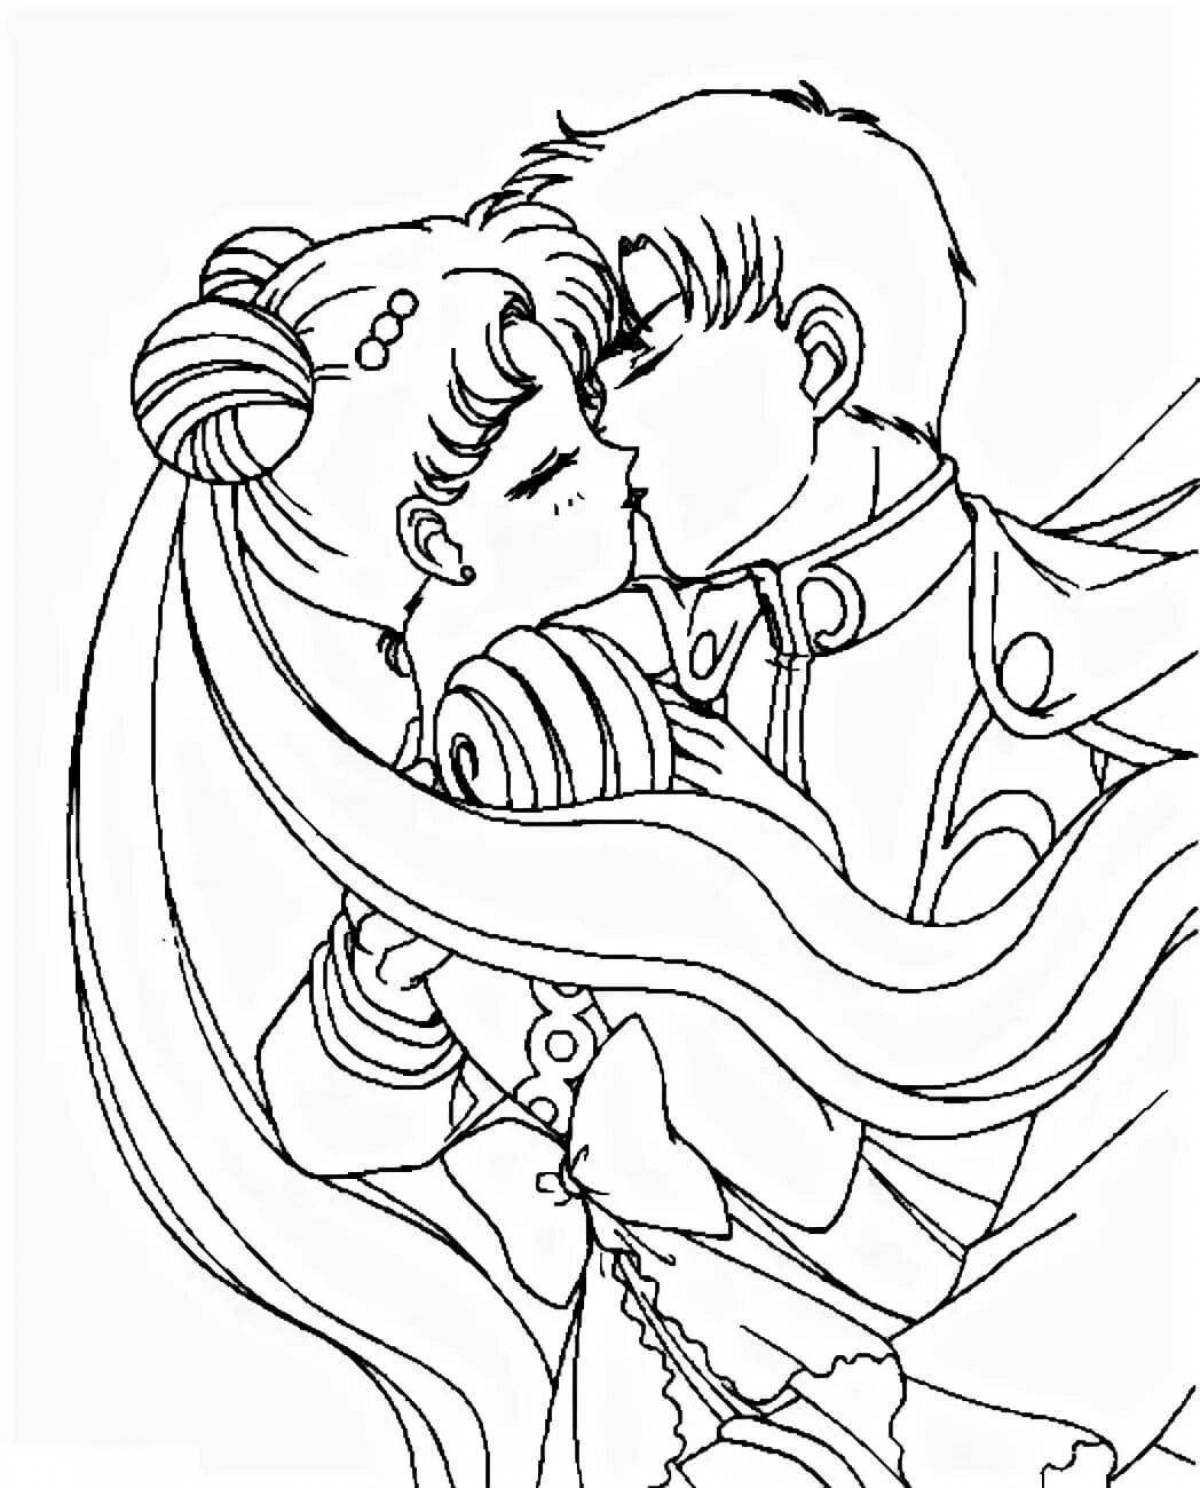 Delightful kiss anime coloring page